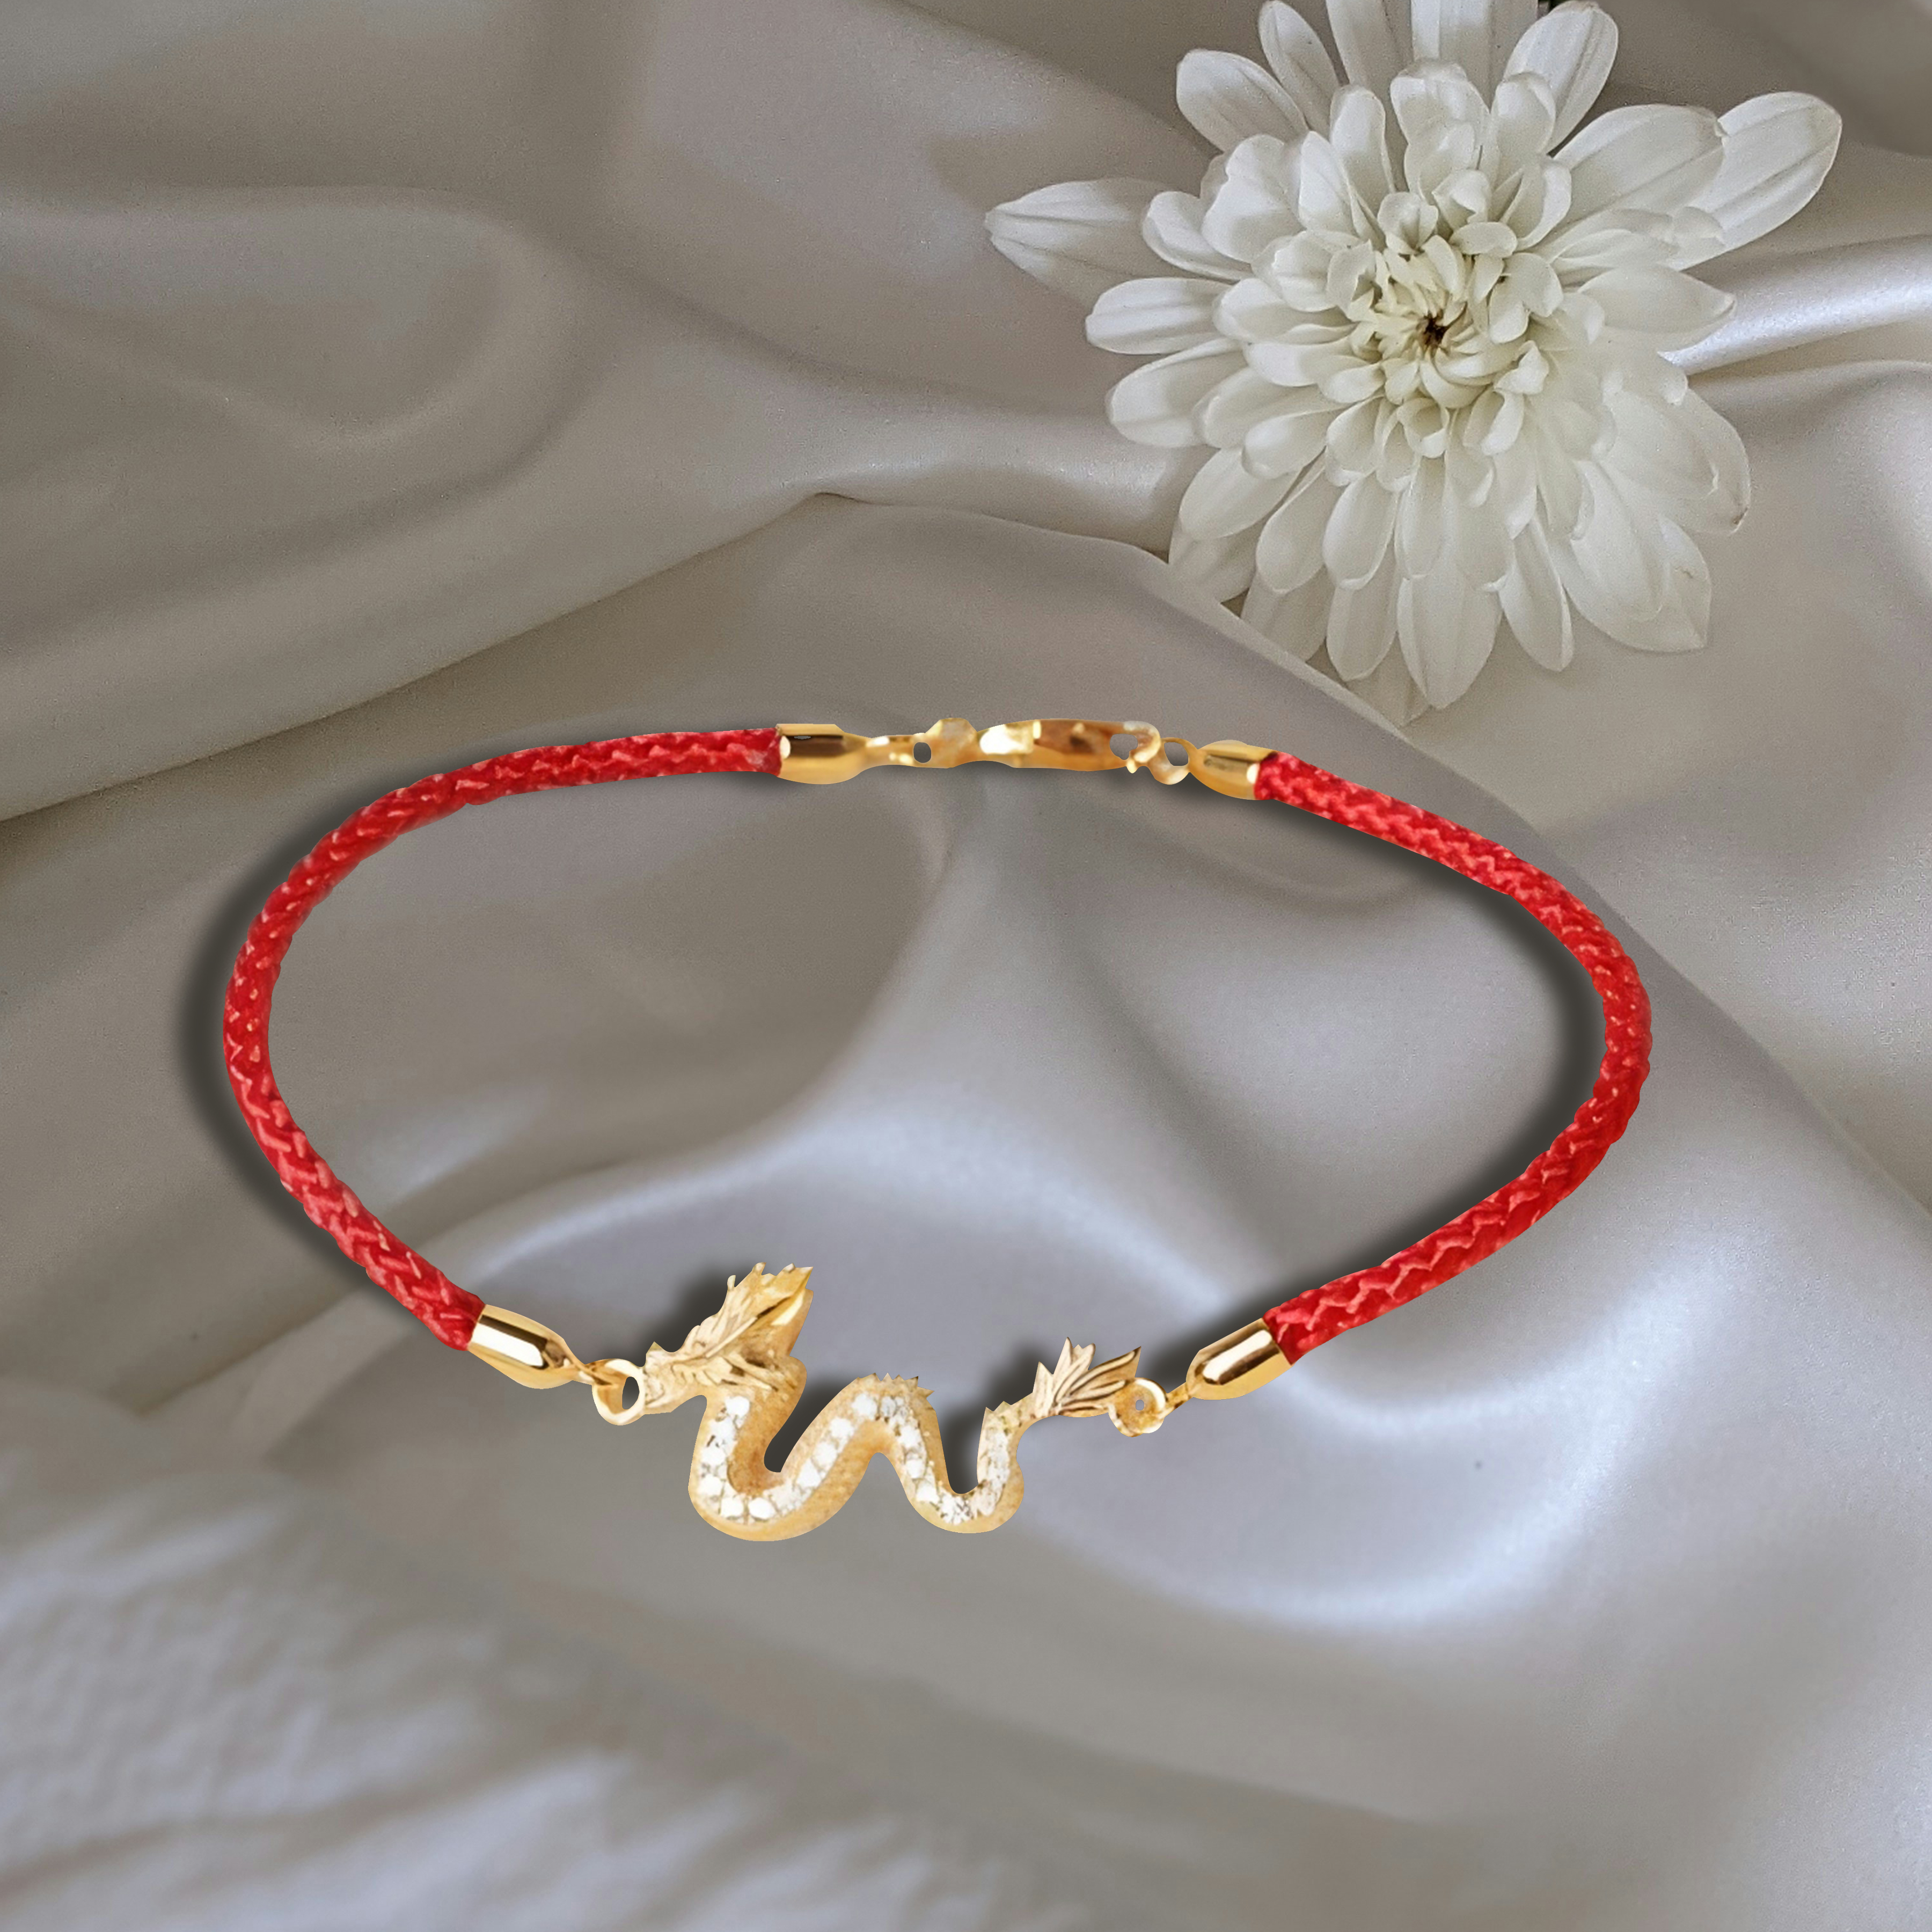 Lucklumen Silver Year Of The Dragon Auspicious Golden Dragon Red String Bracelet Good Luck And Blesses Peace